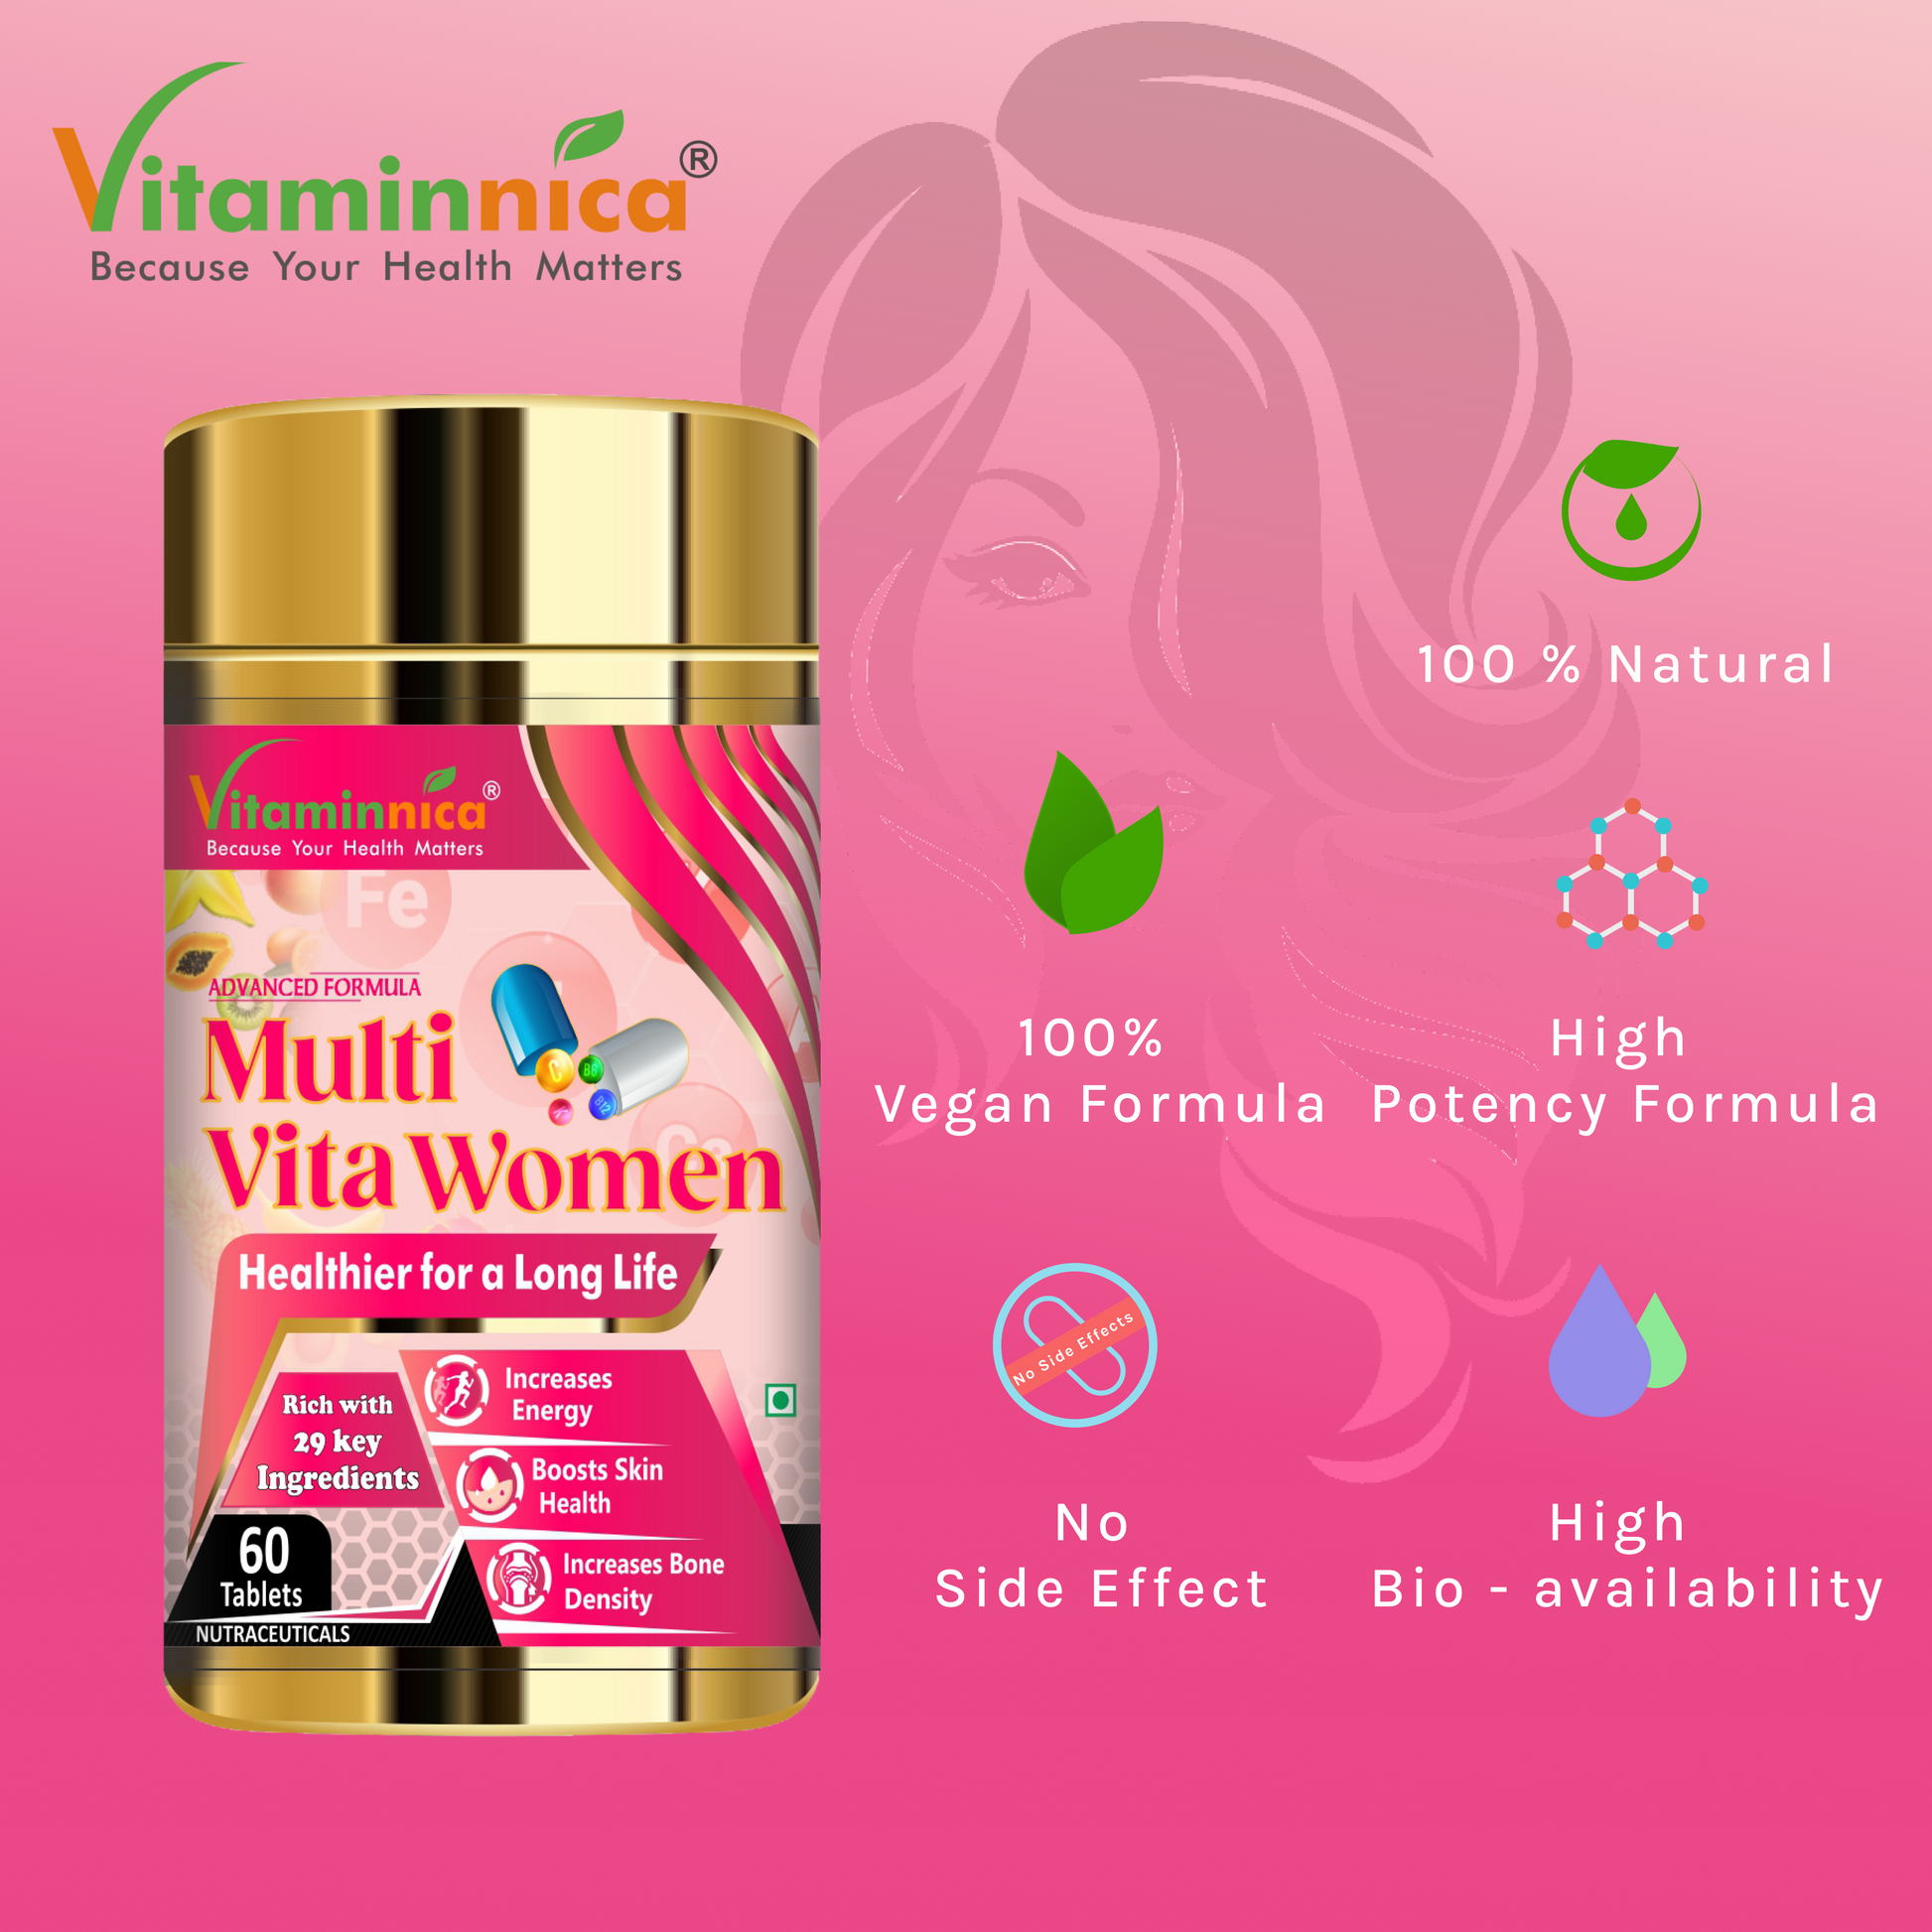 Vitaminnica Combo Pack for Women- Biotin for Hair, Nails, Skin- 60 Capsules with Multi Vita Women for Overall Health & Immunity- 60 Tablets - vitaminnicahealthcare